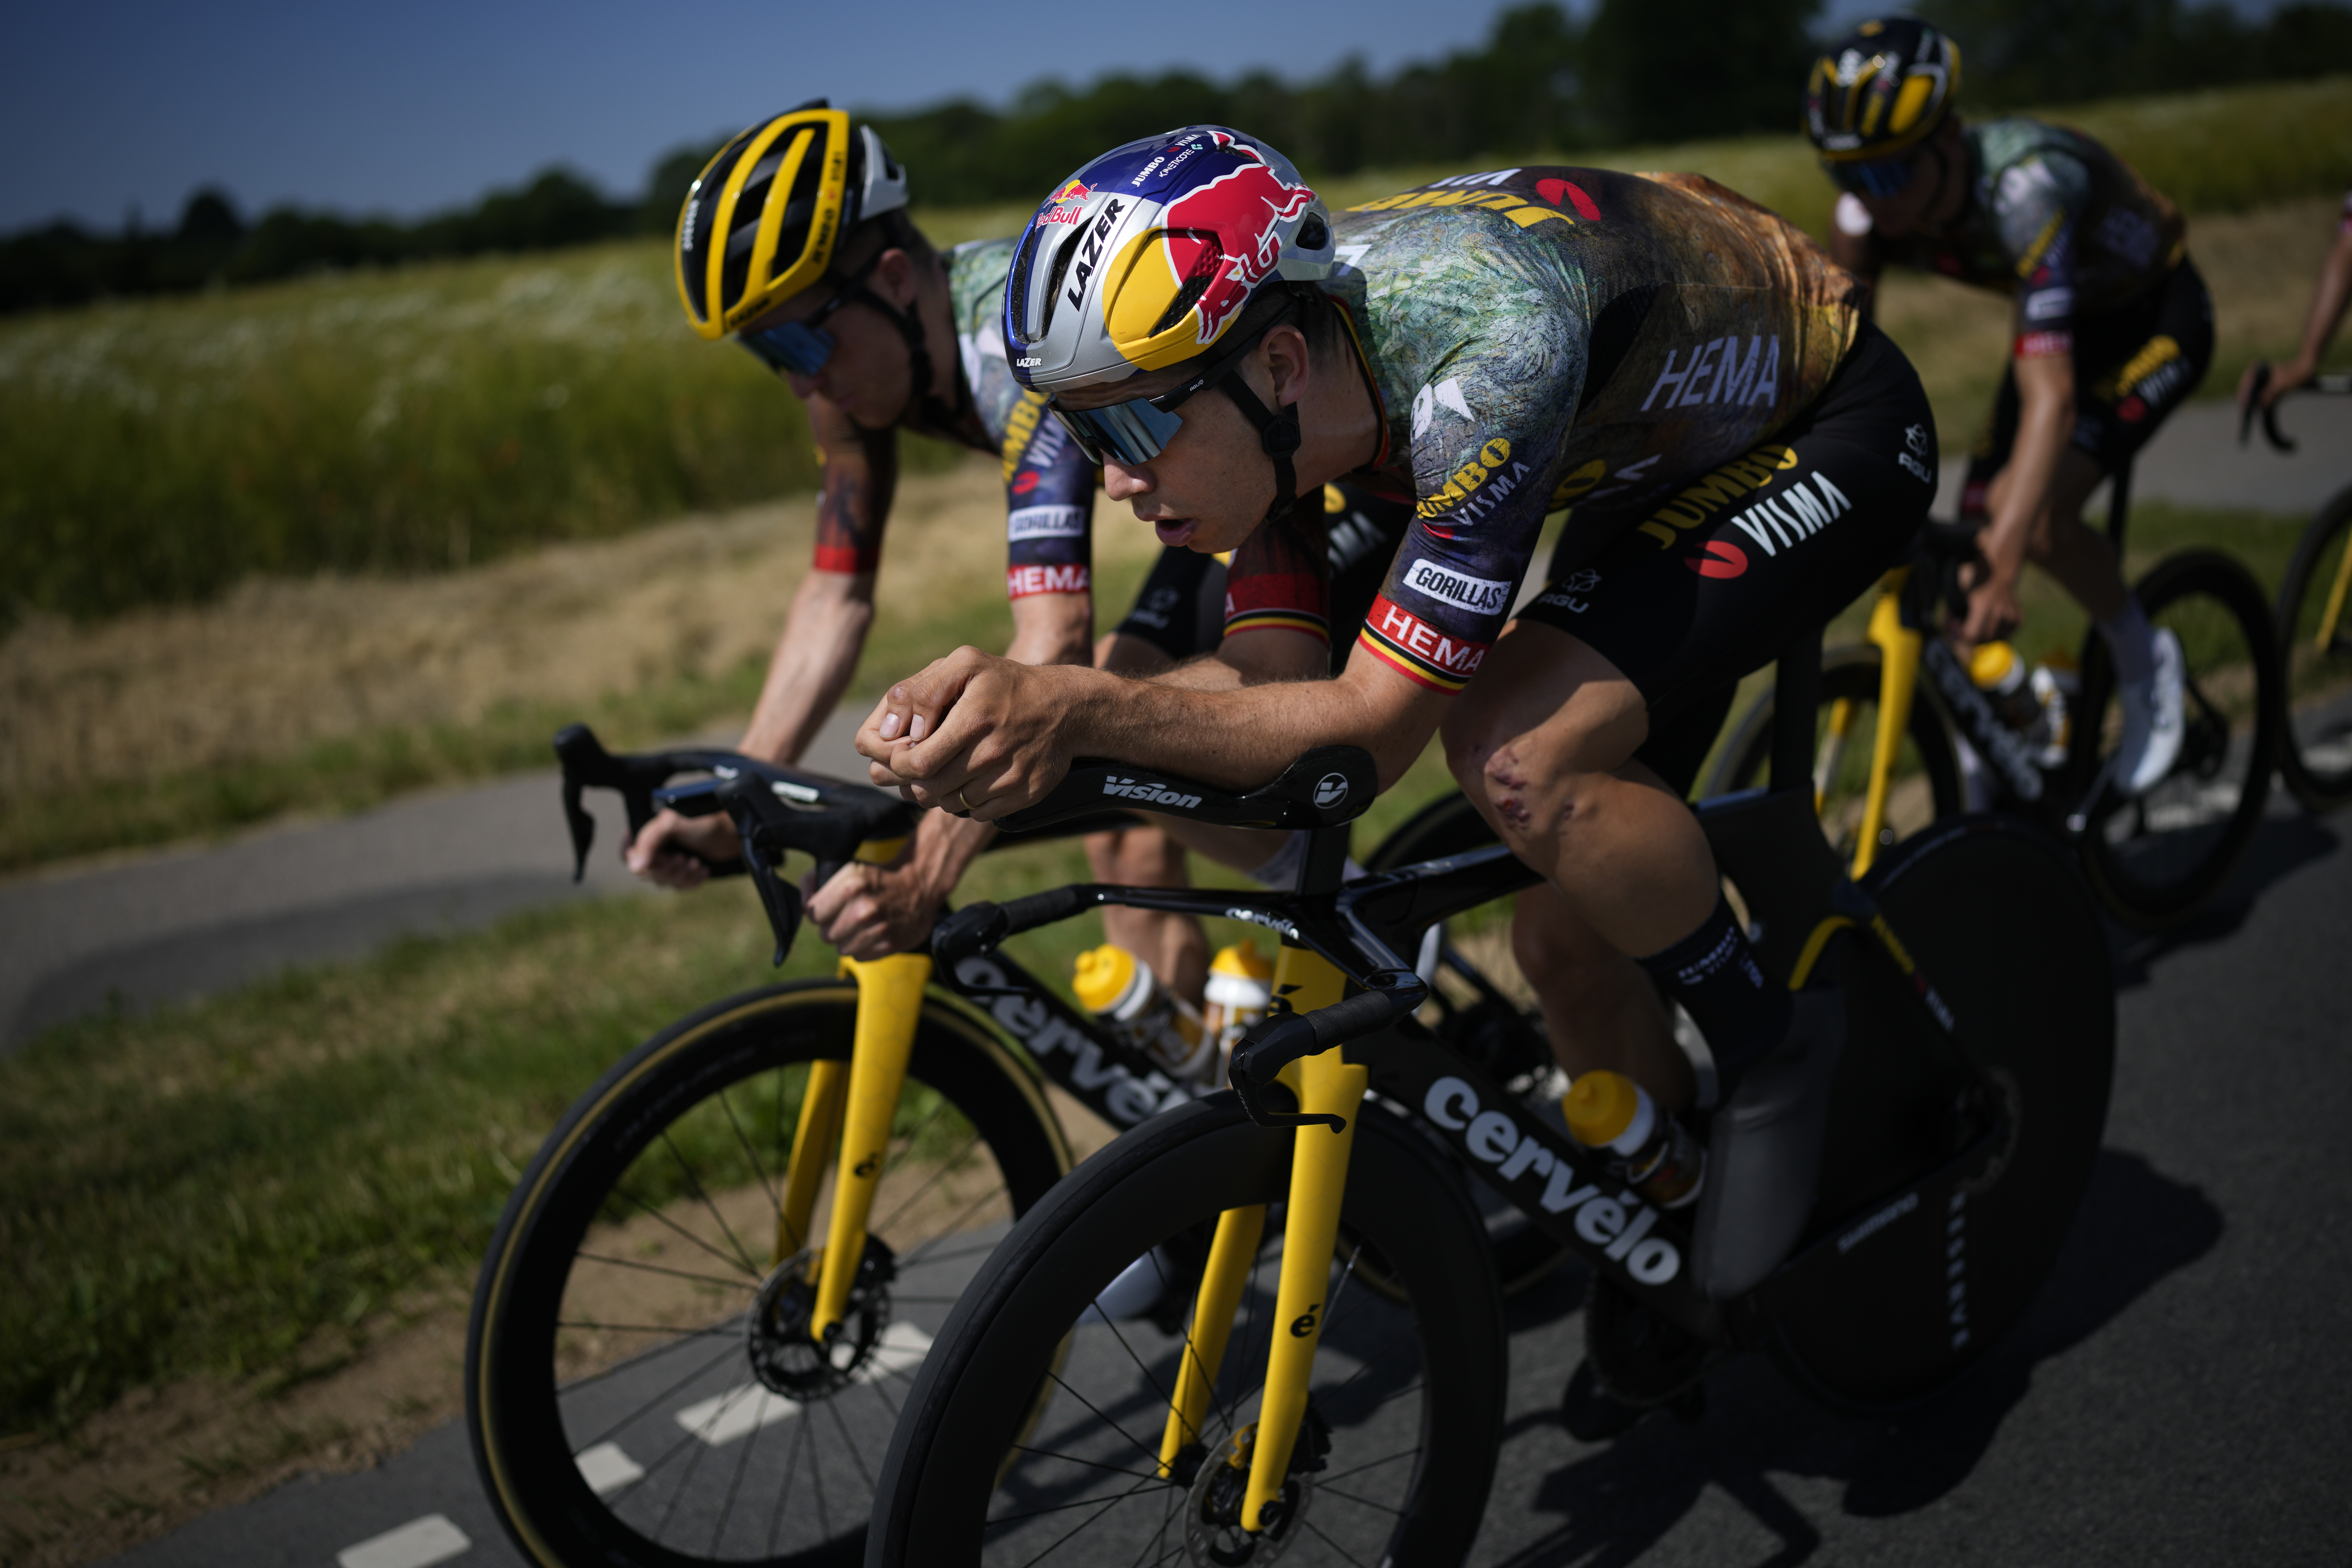 Tour de France live stream (7/1) How to watch online, TV, time